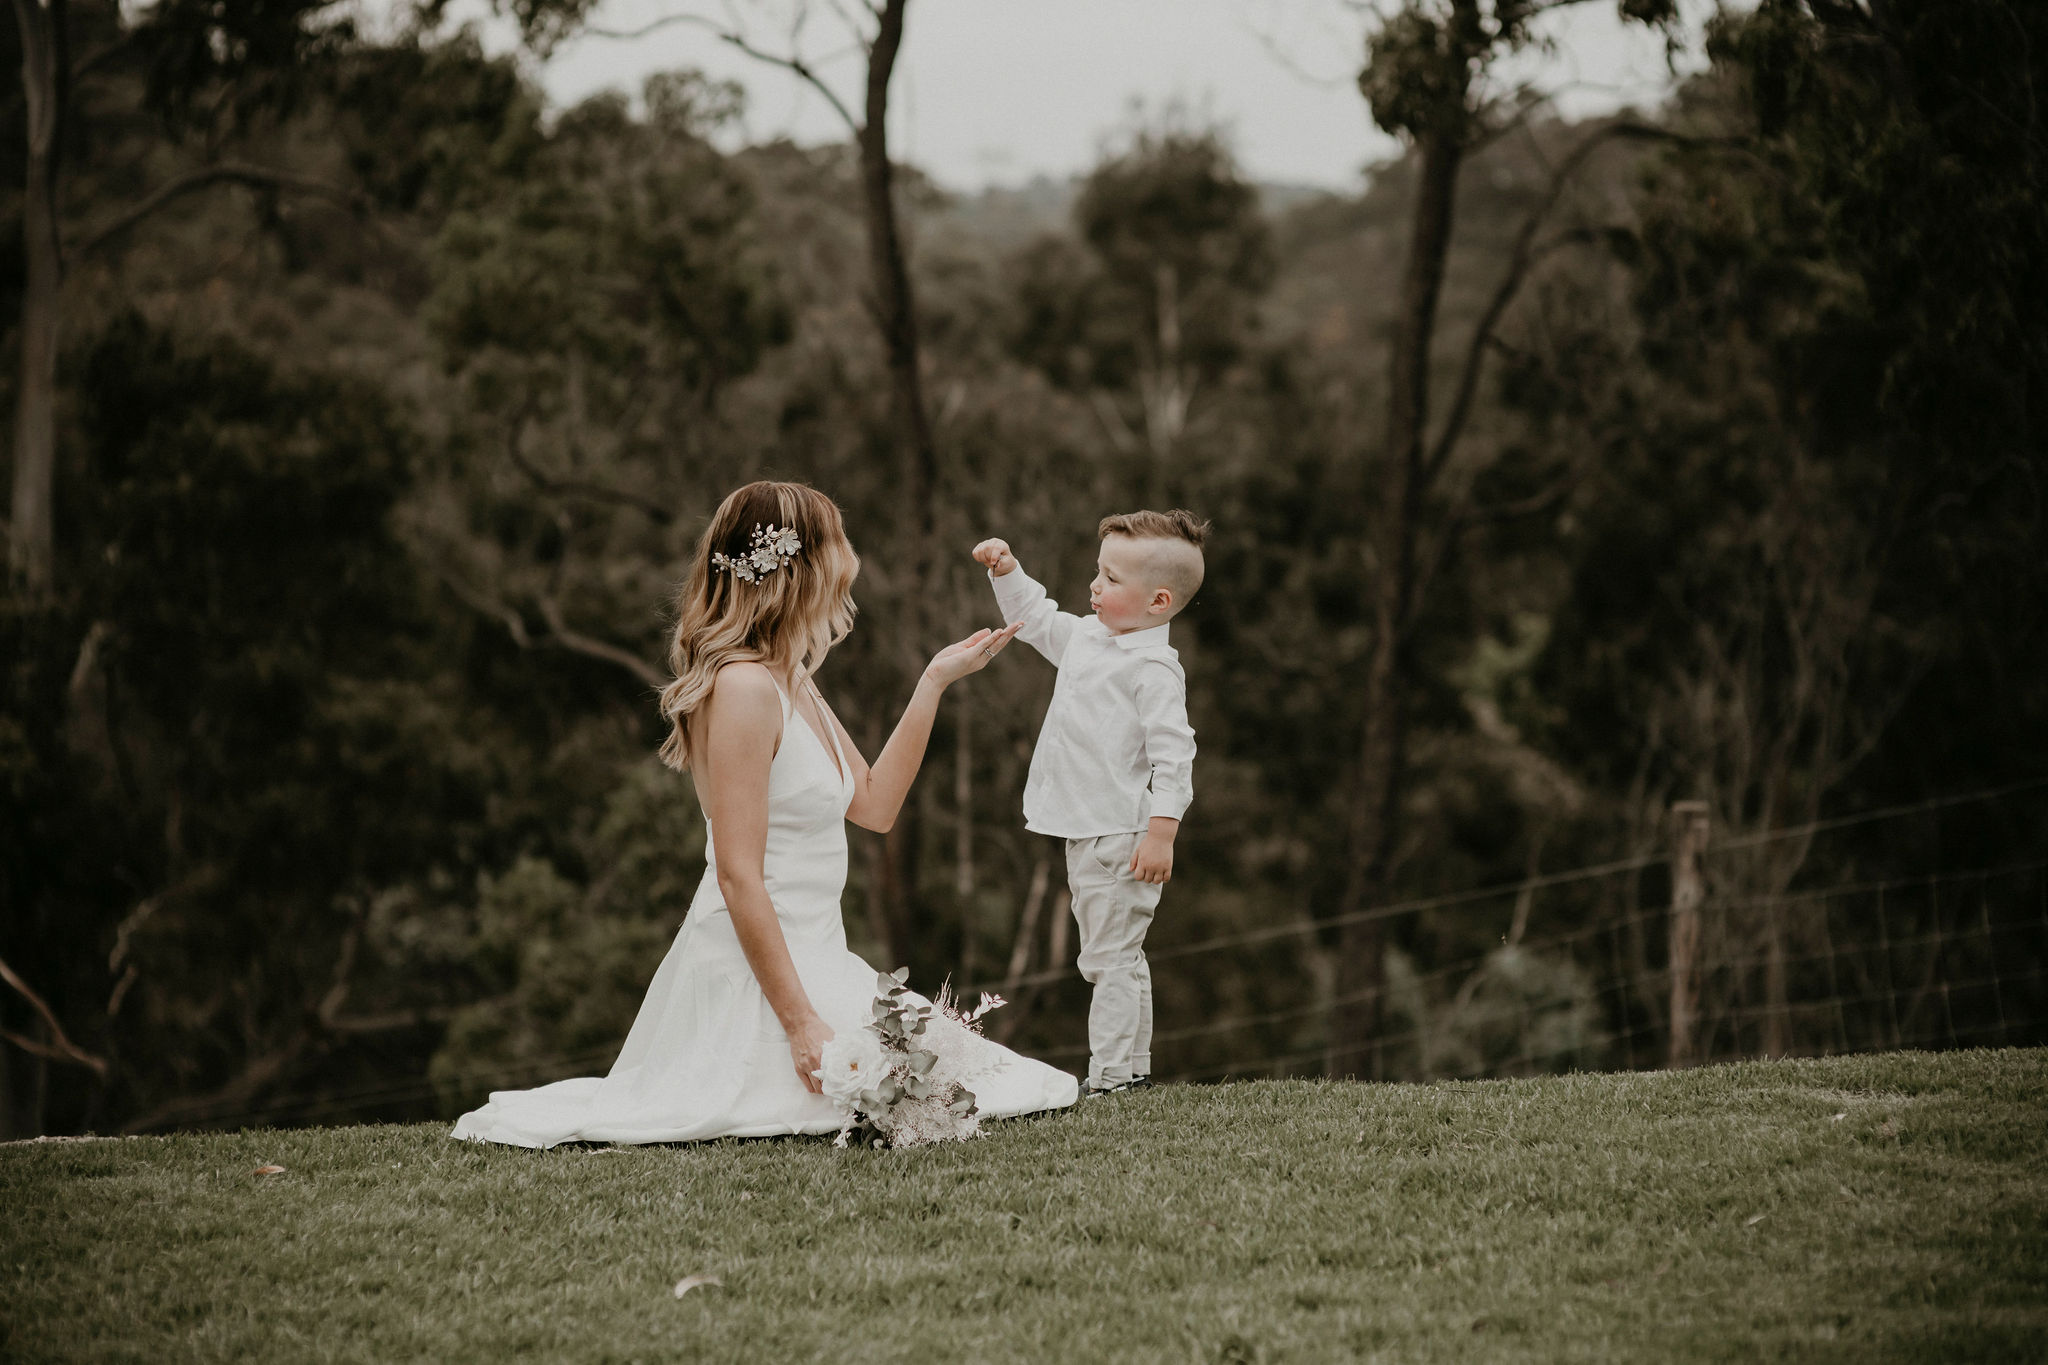 Lets-Elope-Melbourne-Celebrant-Photographer-Elopement-Package-Victoria-Sarah-Matler-Photography-Orchard-with-Kids-Farm-Vigano-weddings-intimate-17